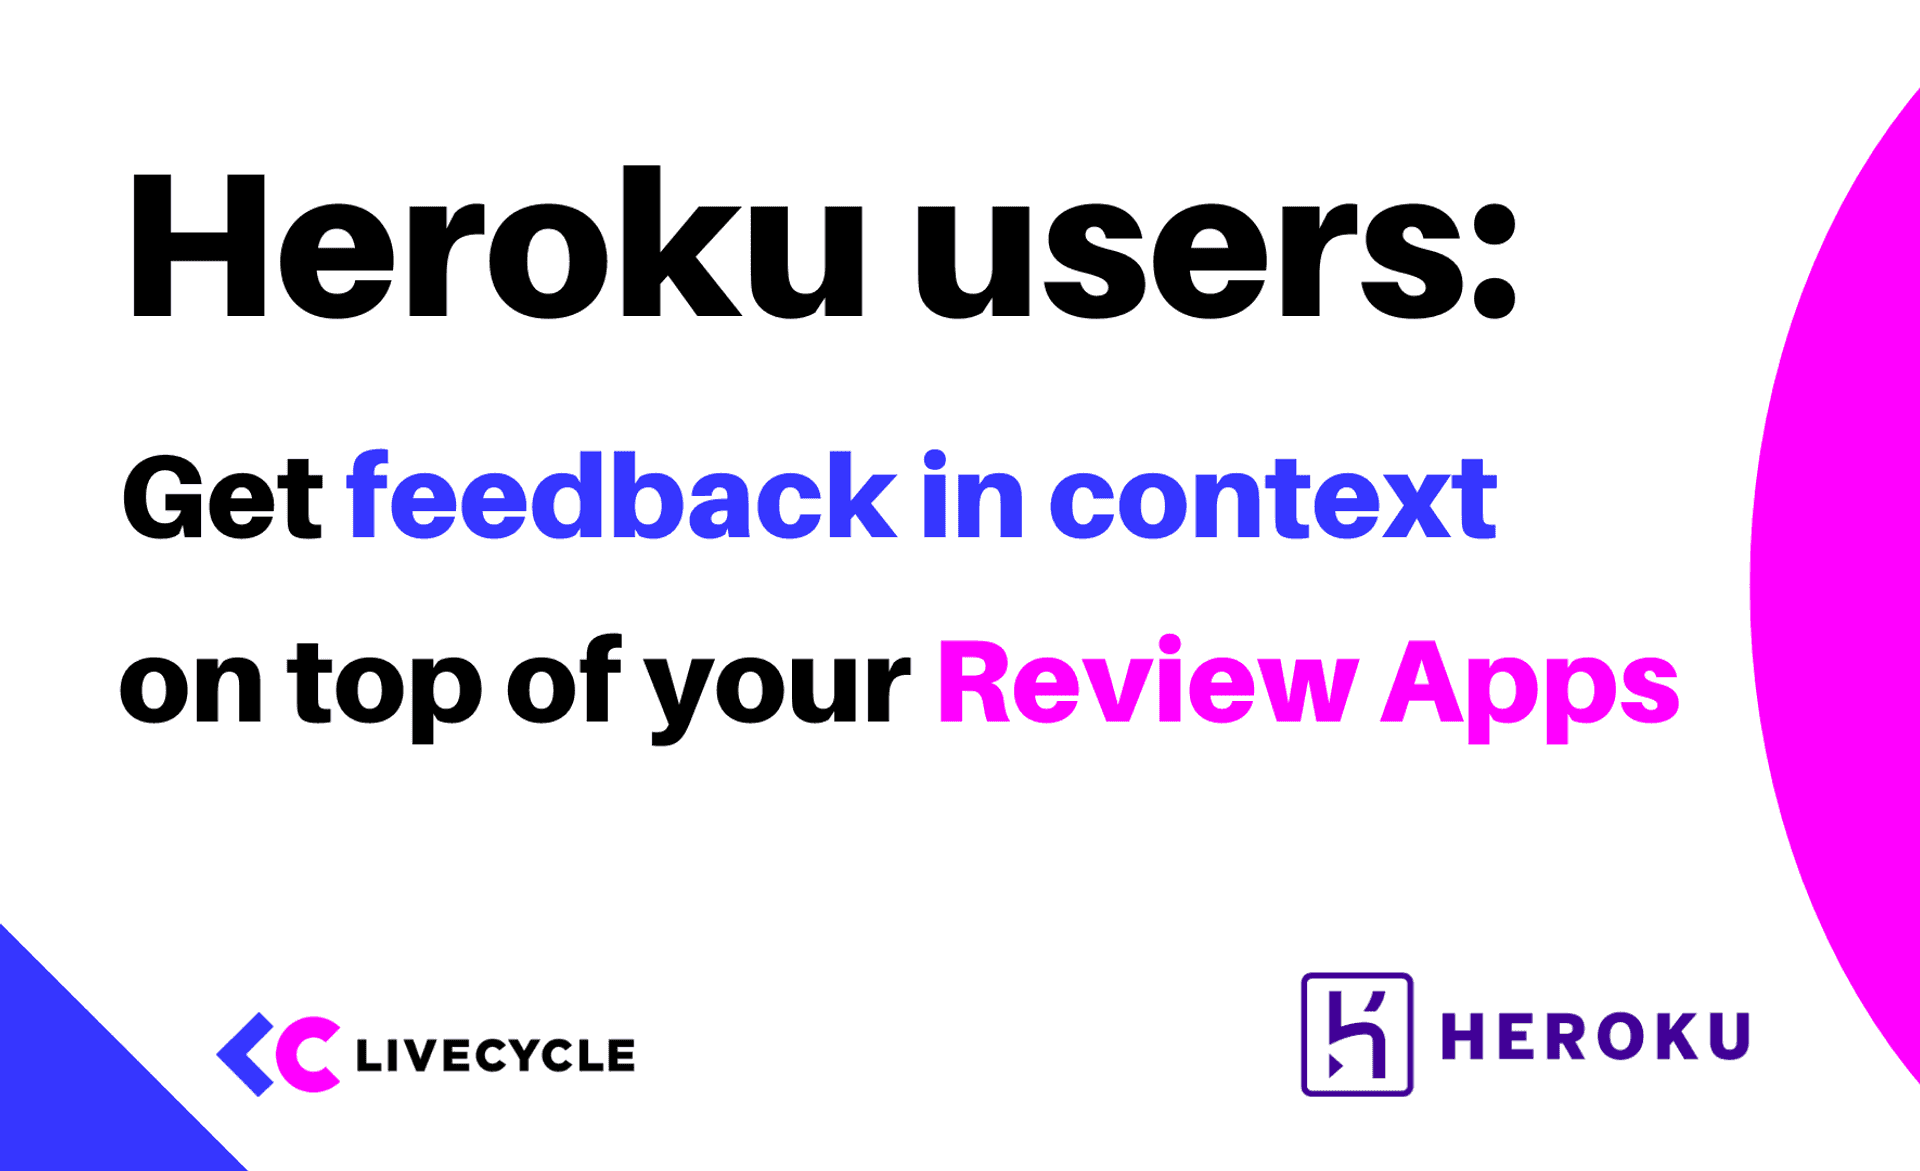 Hey Heroku users: Get visual feedback on top of your Review Apps.